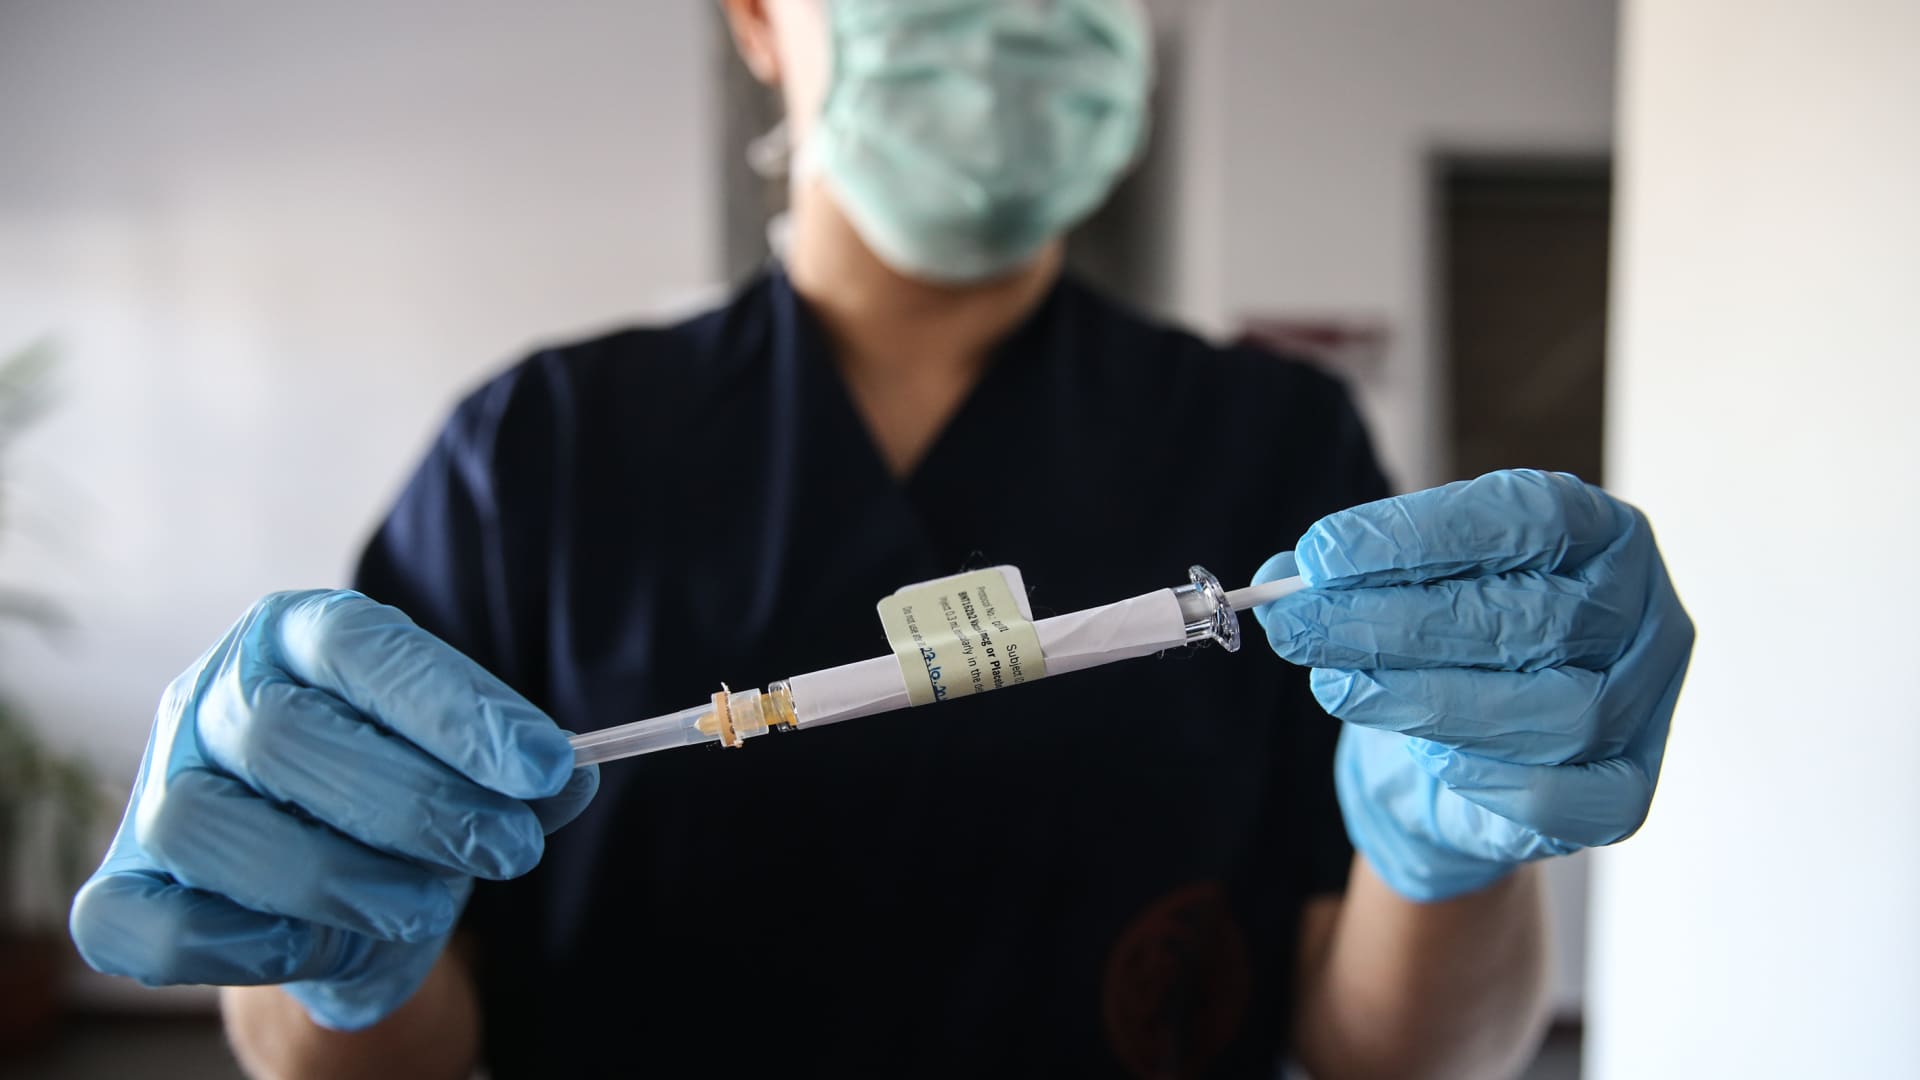 A health care worker holds an injection syringe of the phase 3 vaccine trial, developed against the novel coronavirus (COVID-19) pandemic by the U.S. Pfizer and German BioNTech company, at the Ankara University Ibni Sina Hospital in Ankara, Turkey on October 27, 2020.